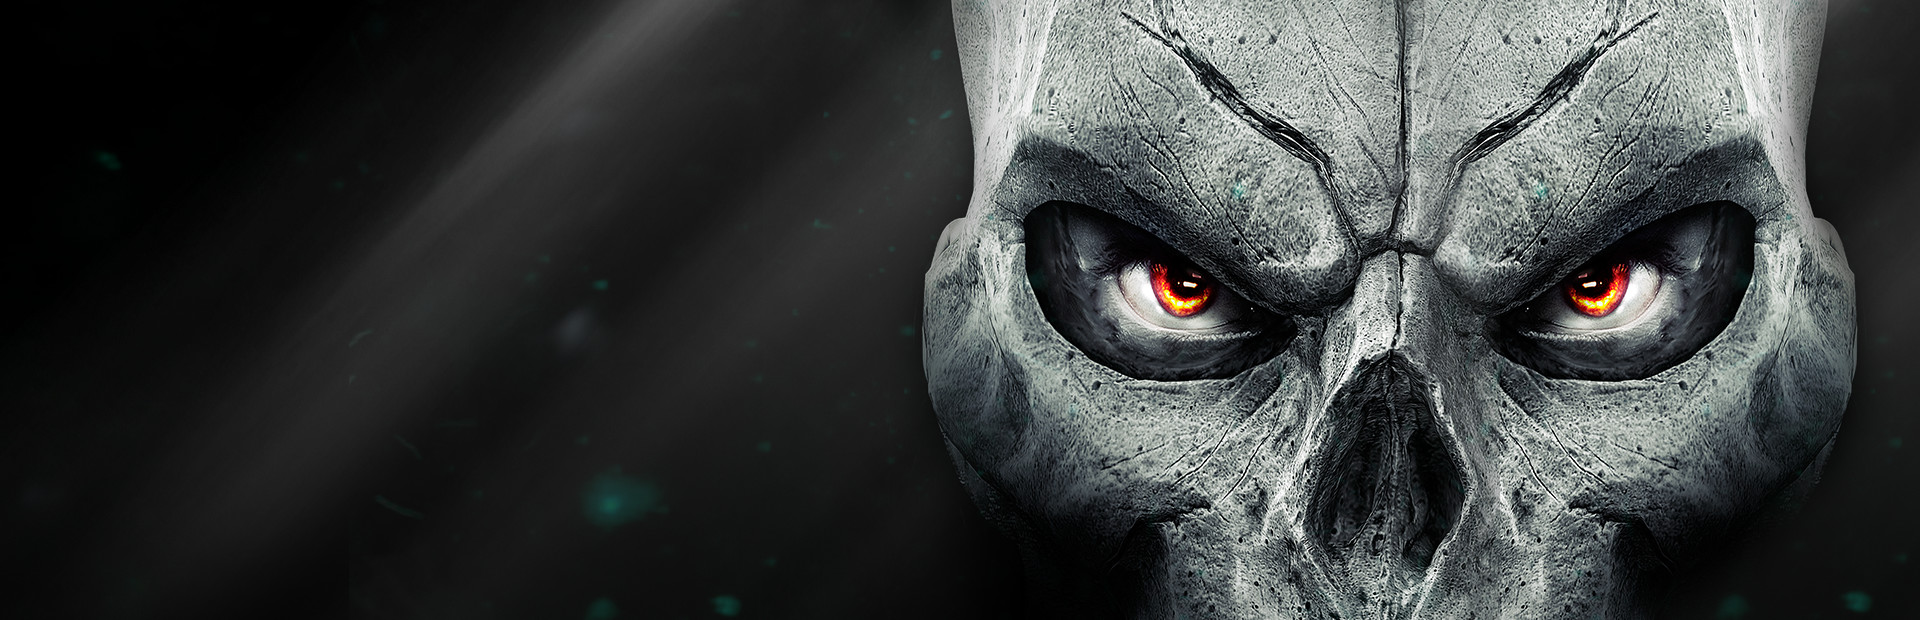 Darksiders II Deathinitive Edition cover image